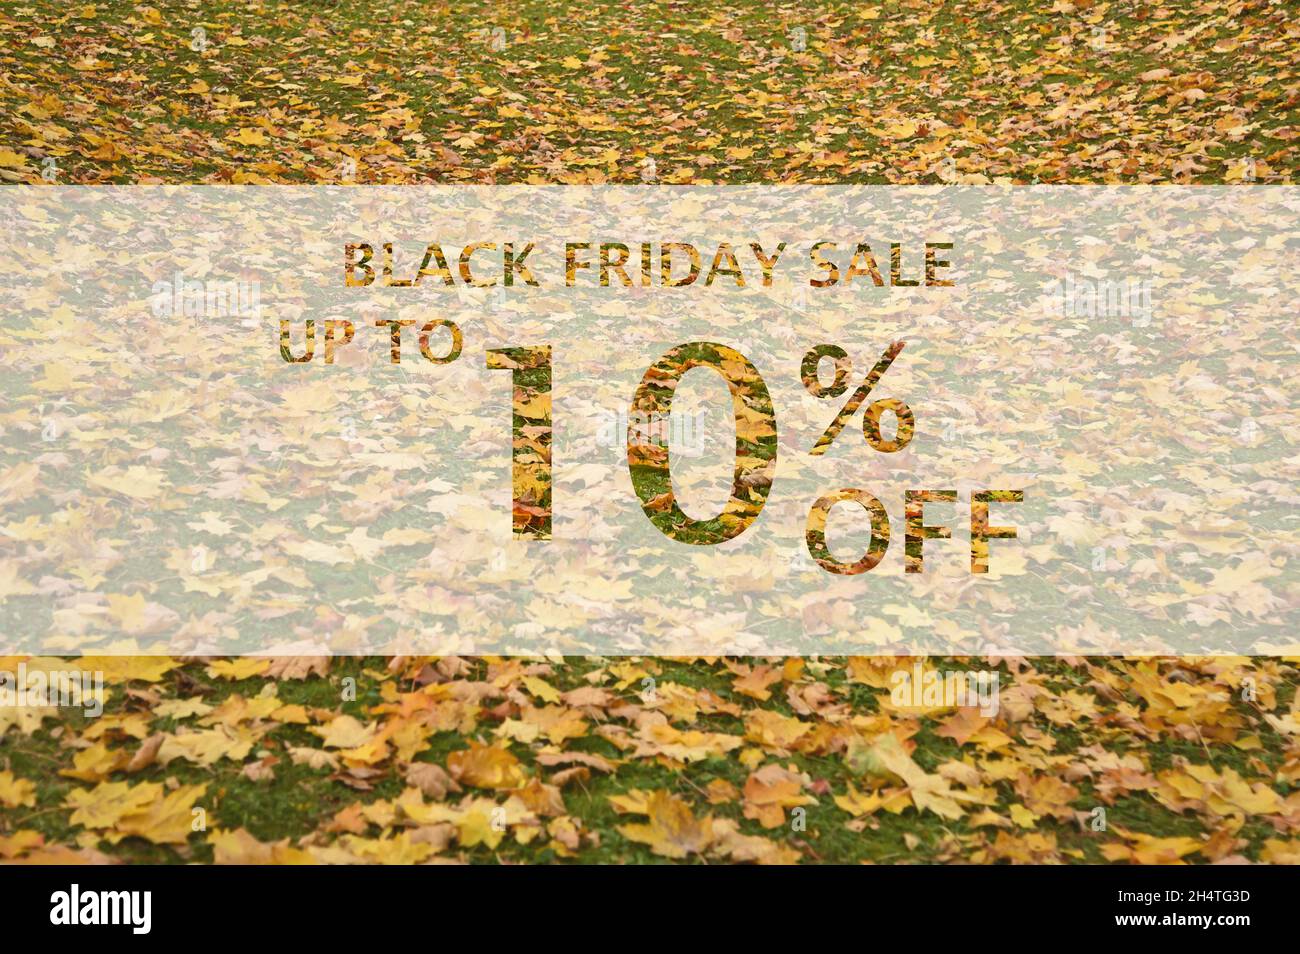 Black friday sale up to 10% off text over colorful fall leaves background. Word Black friday with colorful leaves. Creative nature concept. 10% off Stock Photo